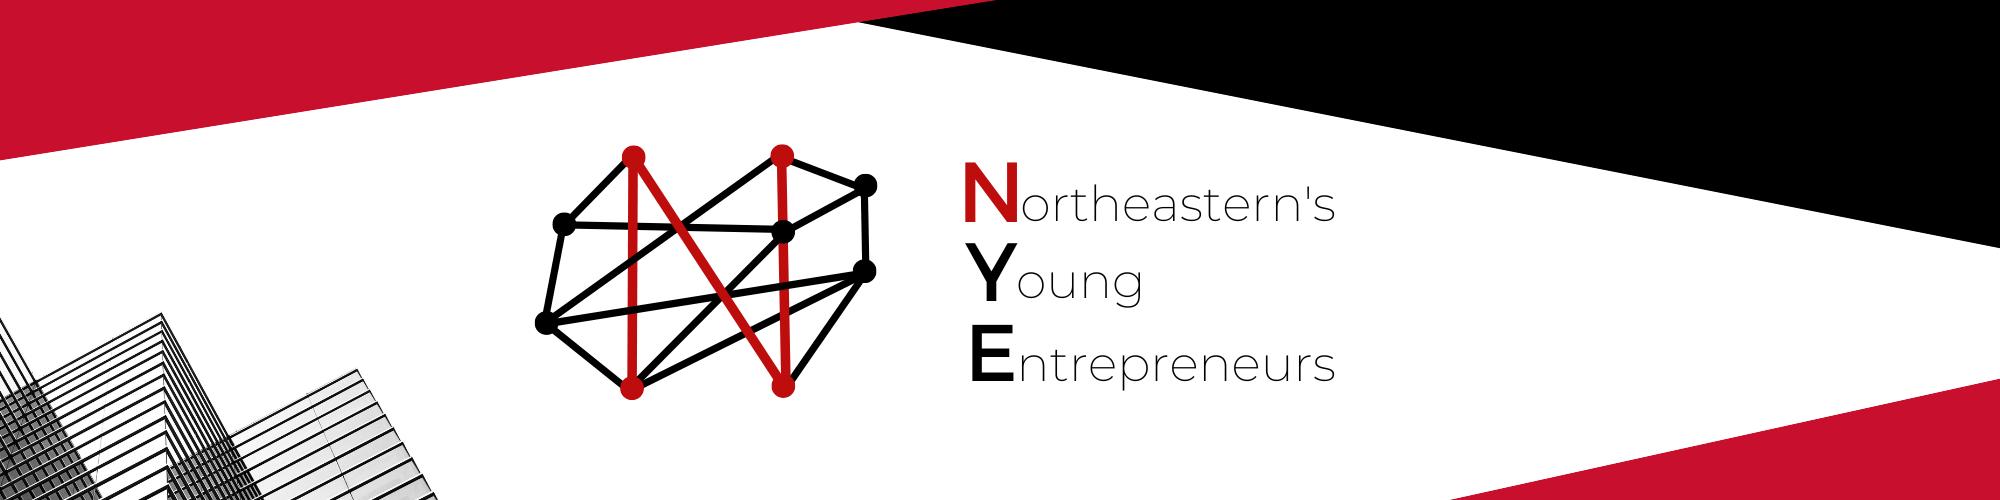 Banner for Northeastern's Young Entrepreneurs